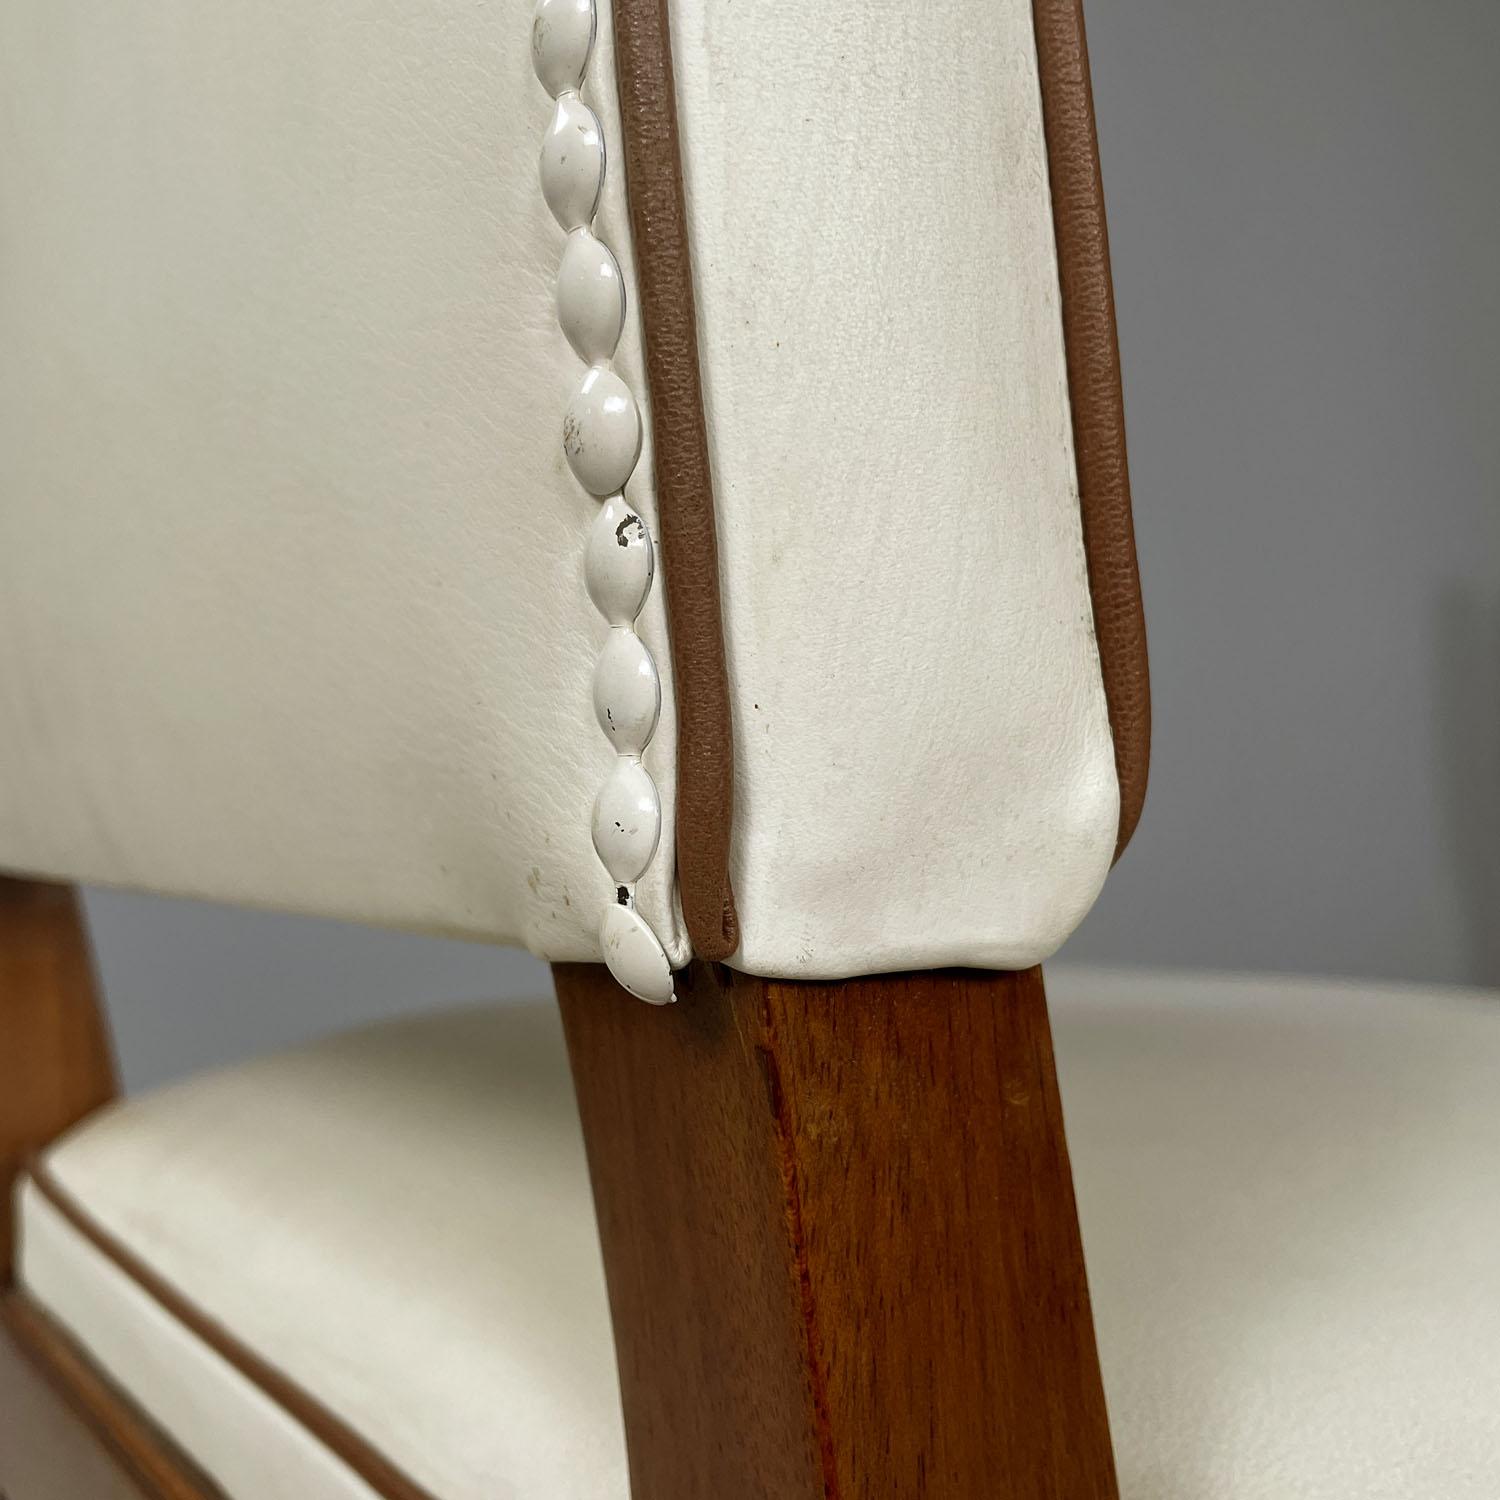 Italian Art Deco white leather and wood chairs by Giovanni Gariboldi, 1940s For Sale 5